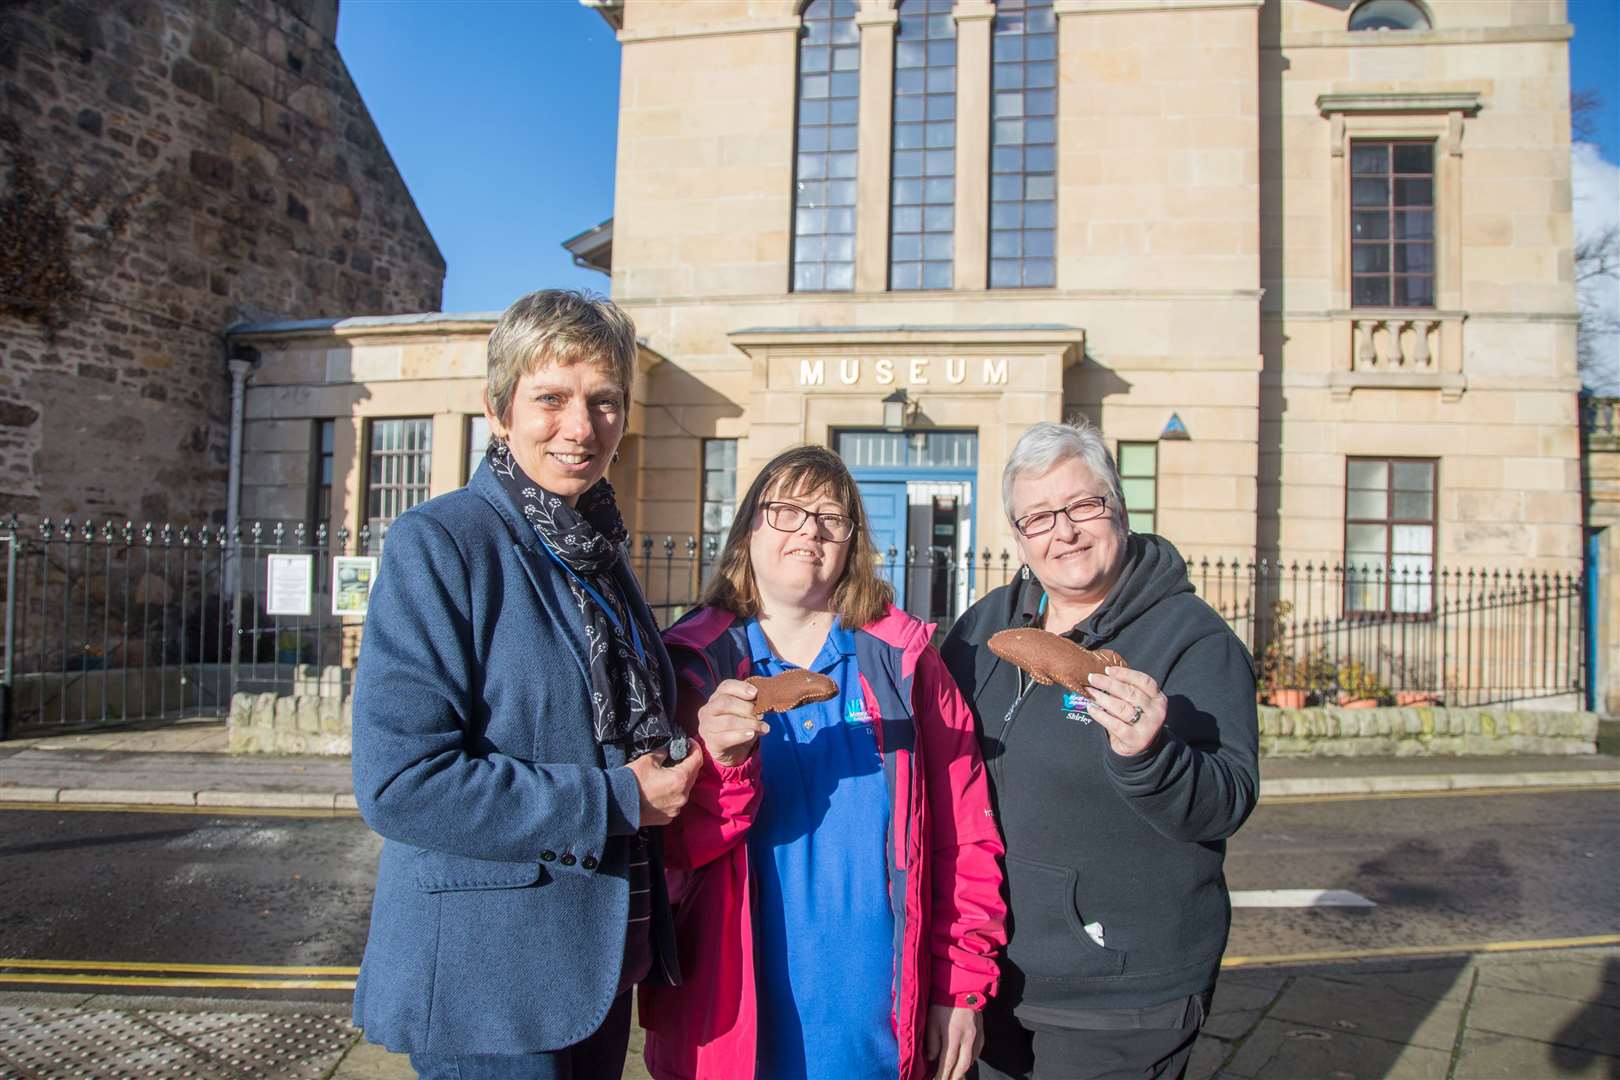 Elgin Museum has received funding of £23,270 from Weston Loan Program. Left to right: Elgin Museum's Alison Wright, trainee with Moray Reach Out Diane Cameron and Shirley Nicoll of Moray Reach Out. Picture: Becky Saunderson